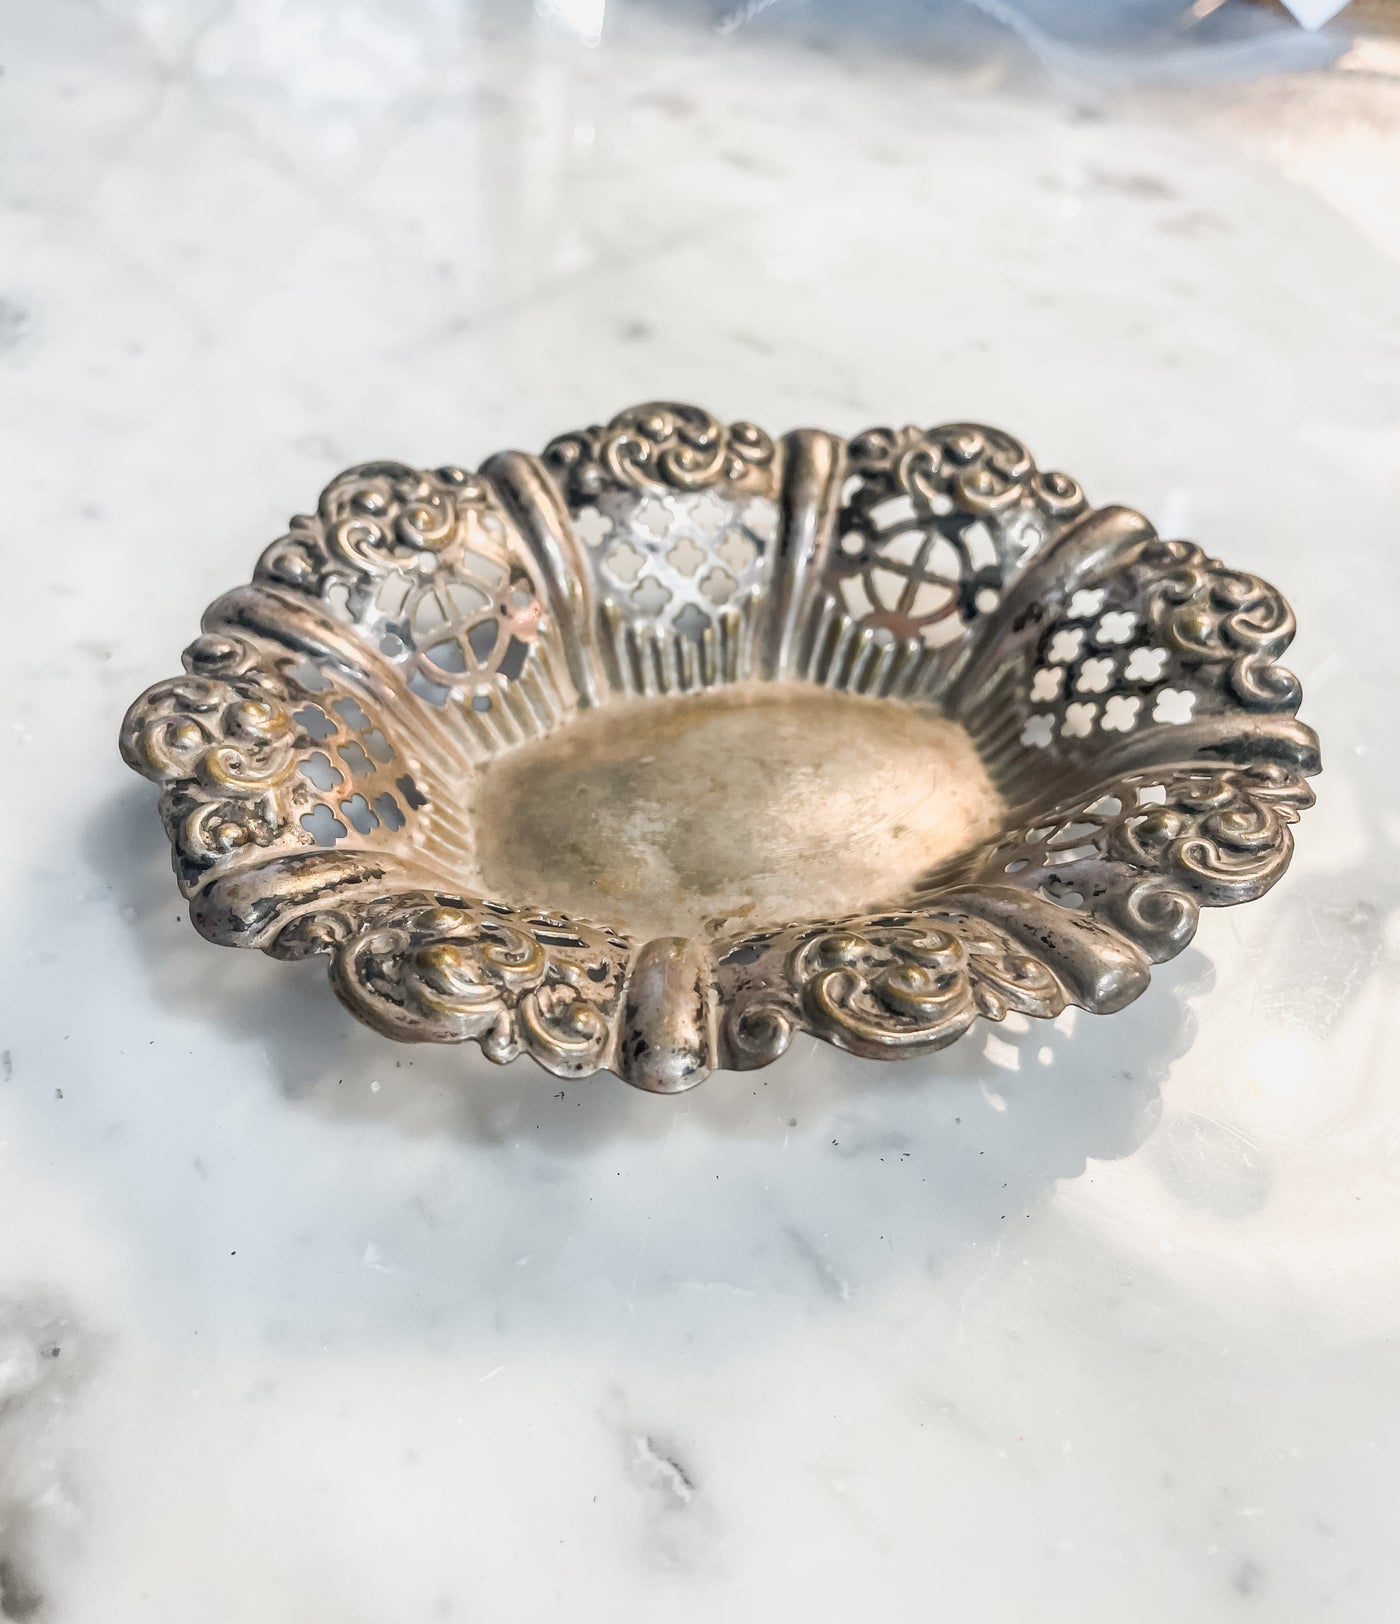 Antique Silver Pierced Oval Tray